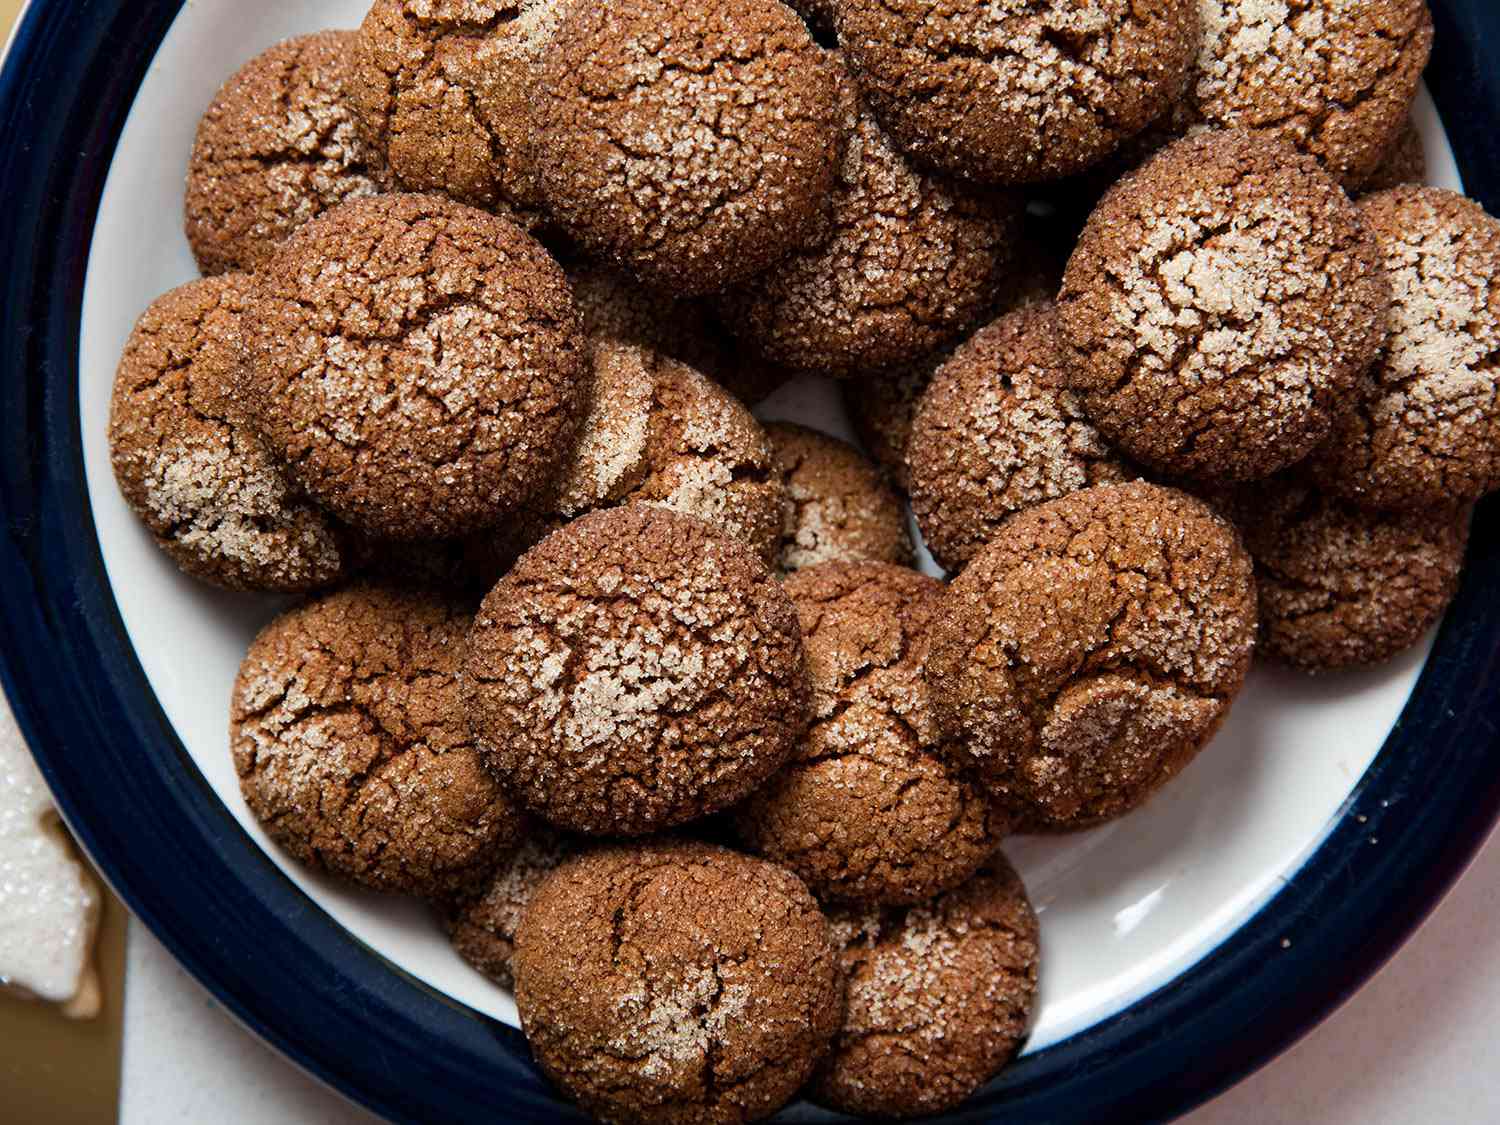 Top down view of a plate of gingersnaps.